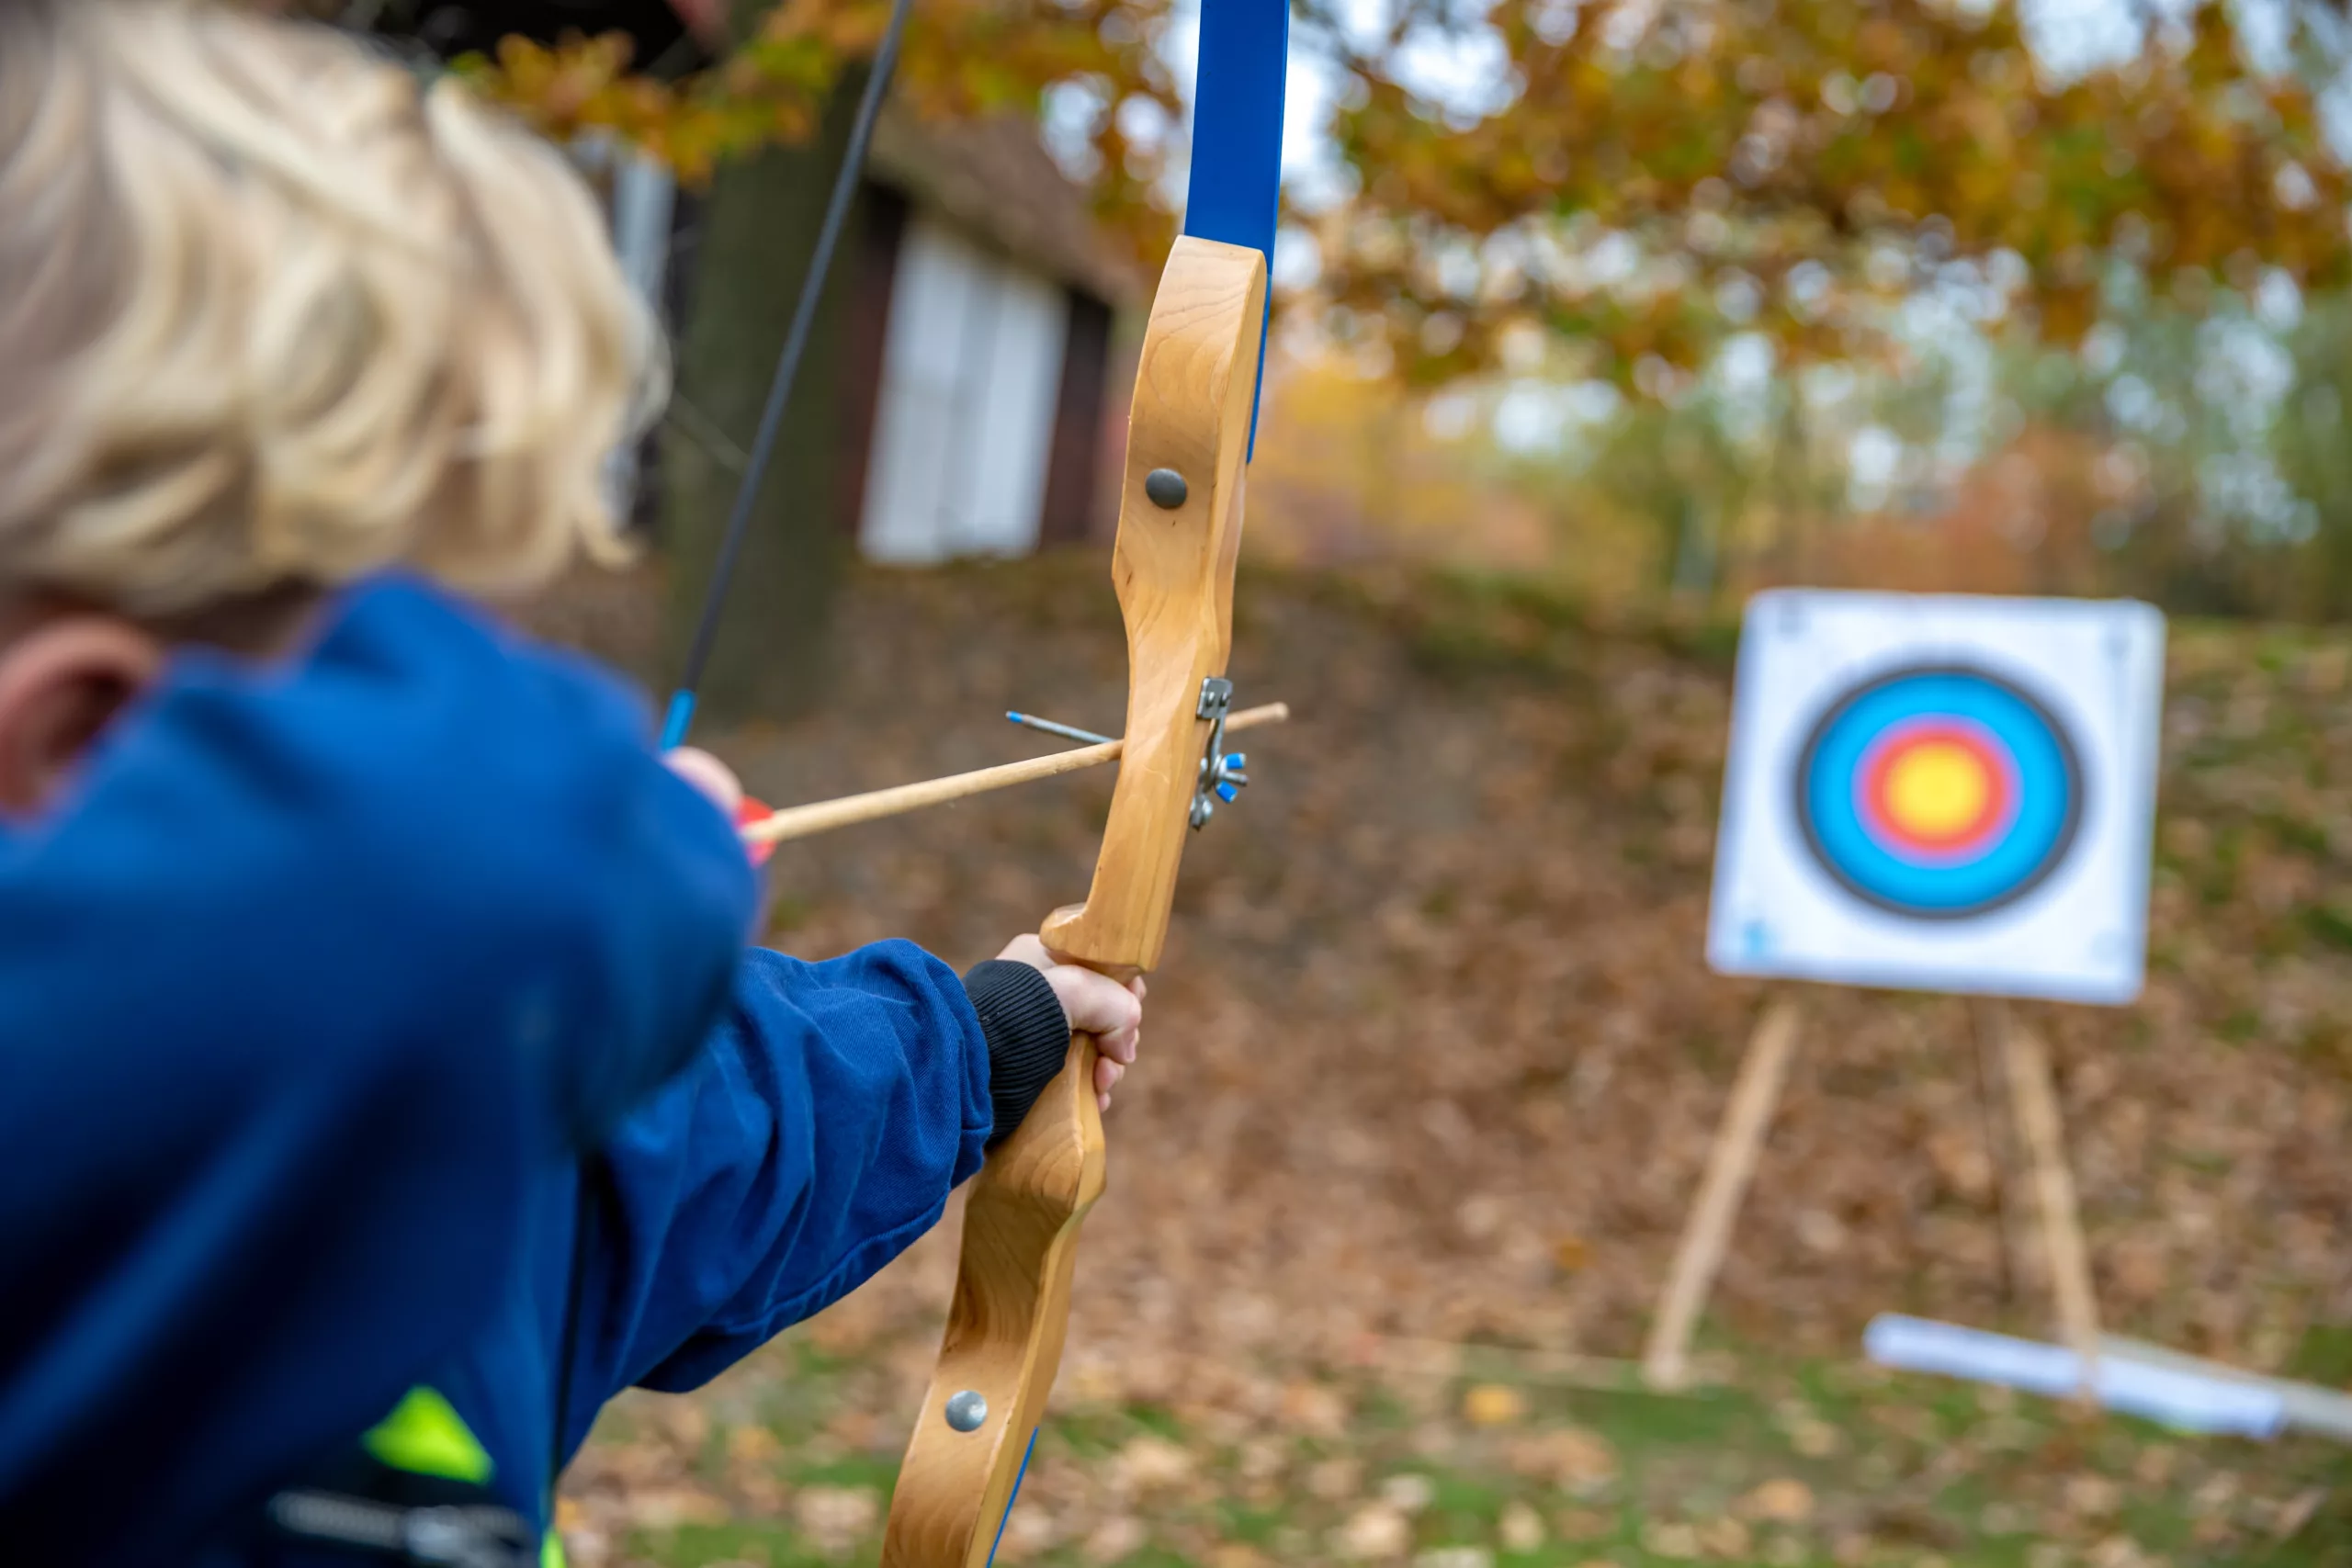 Children shot on target during a competition in archery in the forest